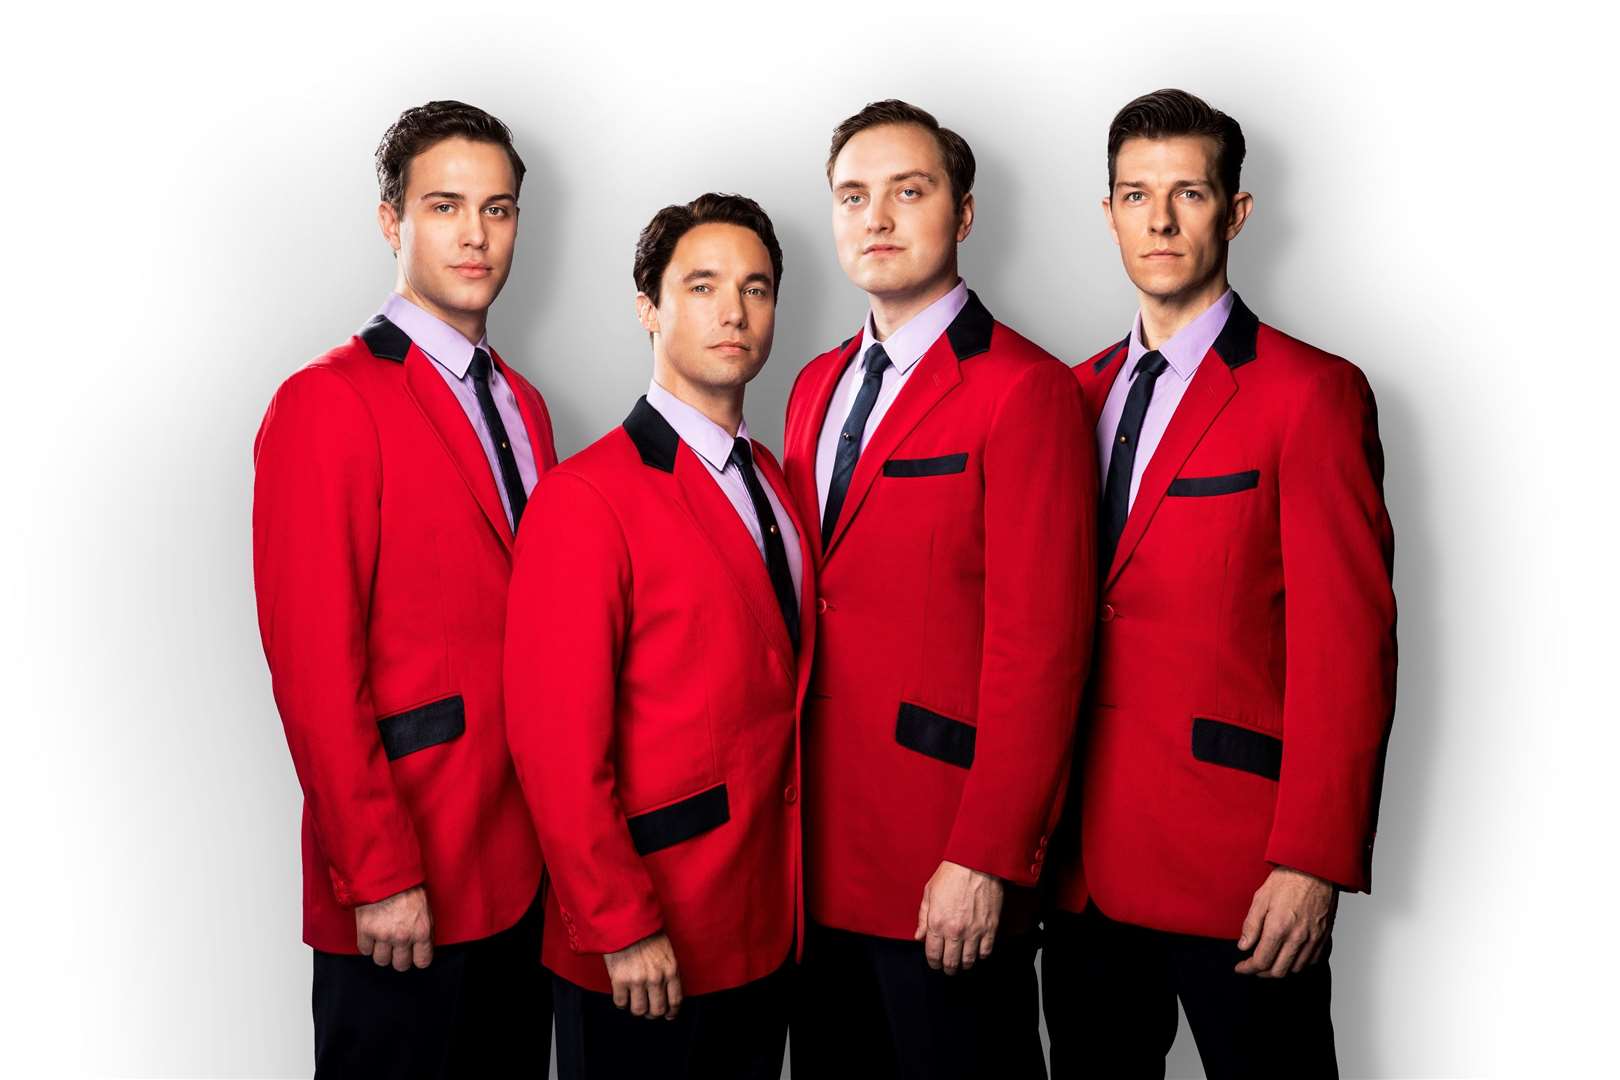 There will be plenty foot tapping hits on the go when The Jersey Boys come to the Granite City.